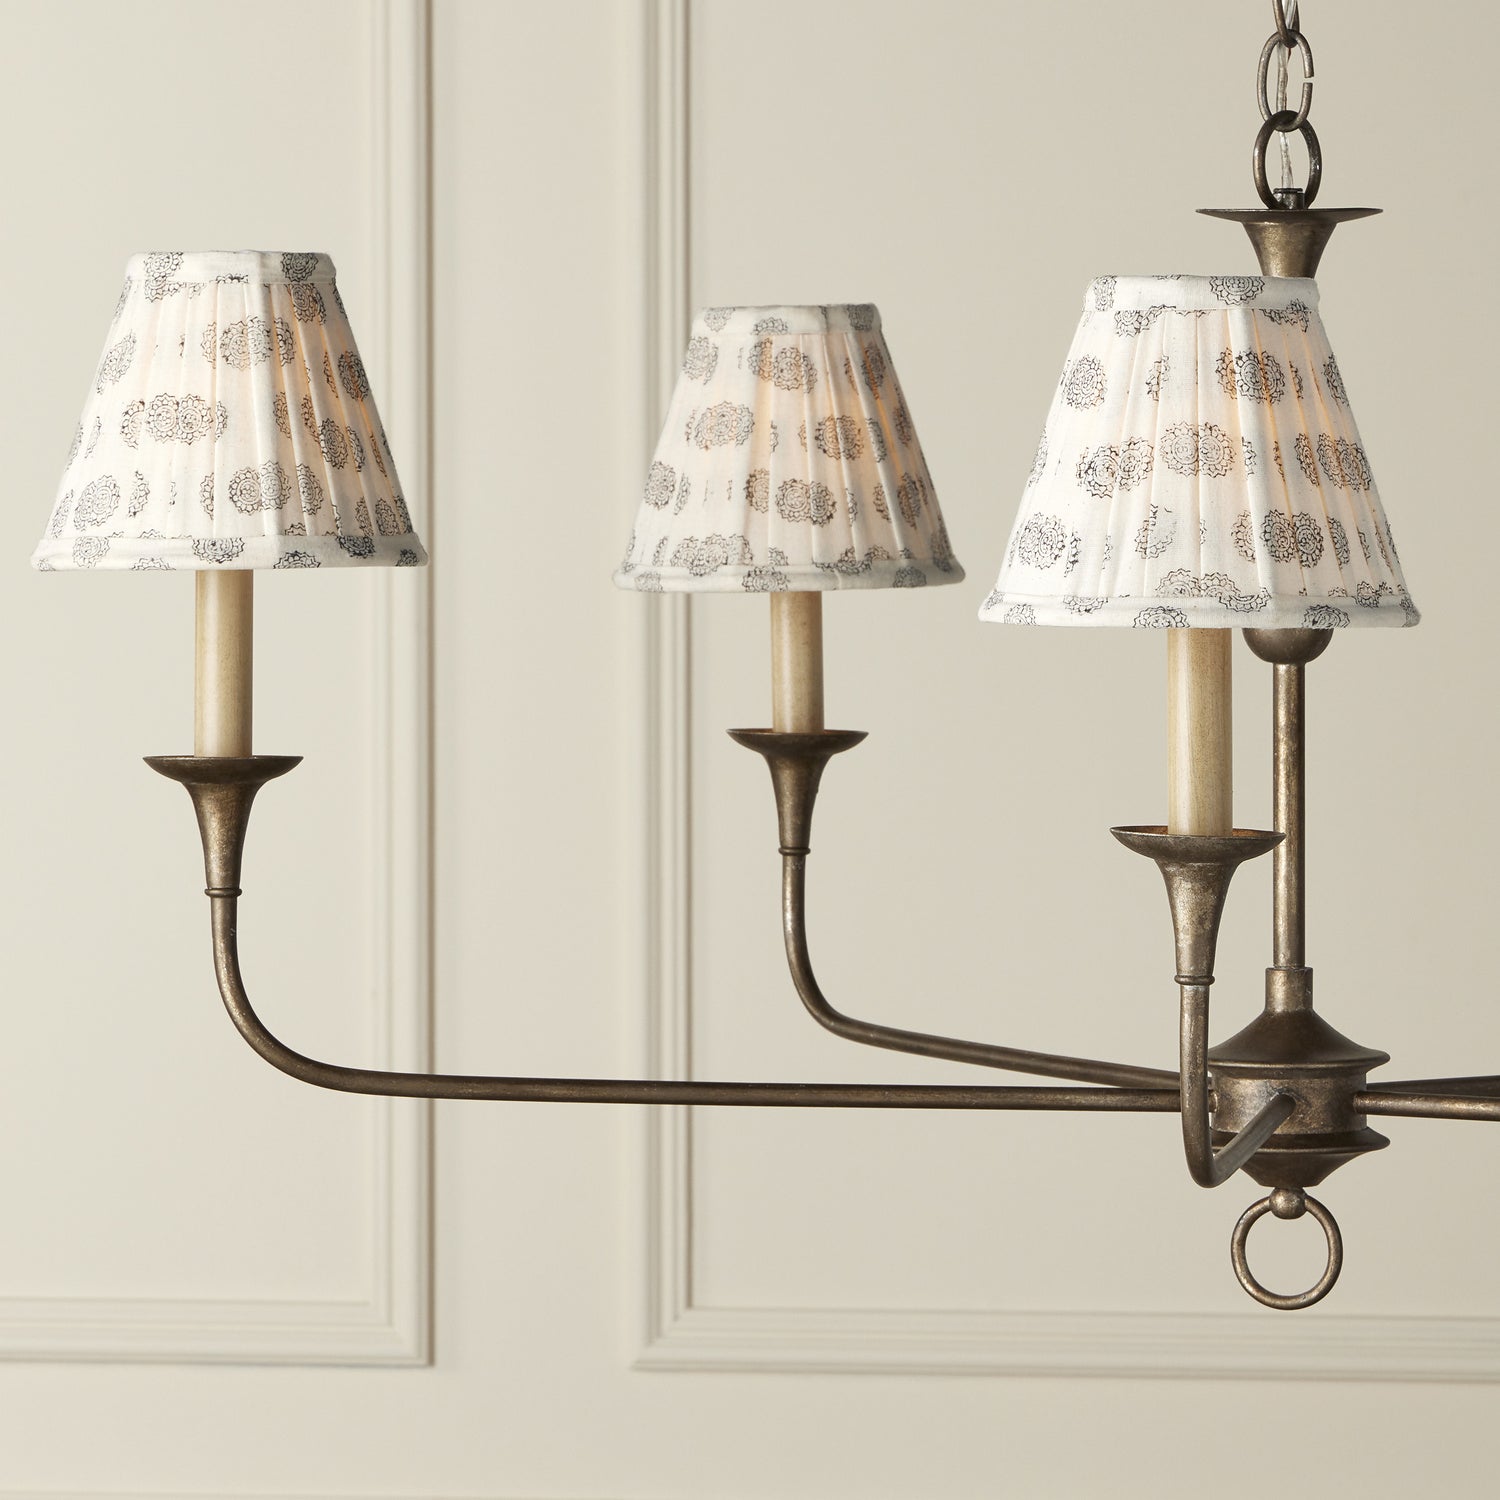 Chandelier Shade in Natural/Charcoal finish